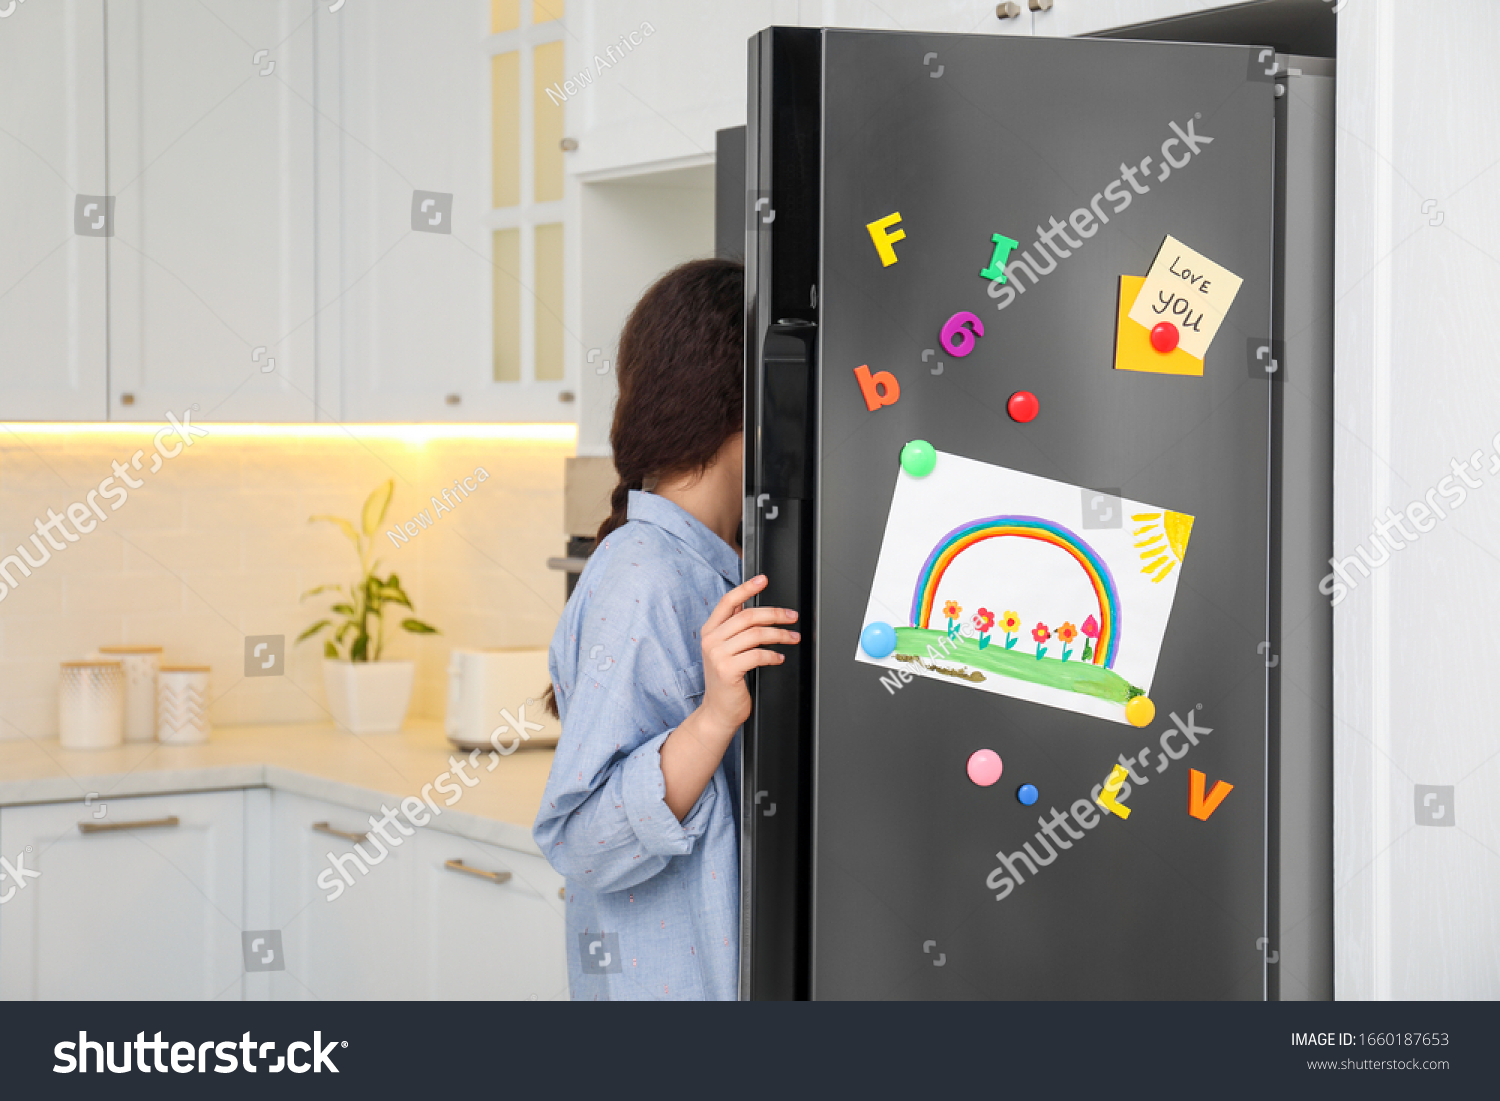 Woman opening refrigerator door with child's drawing, notes and magnets in kitchen #1660187653